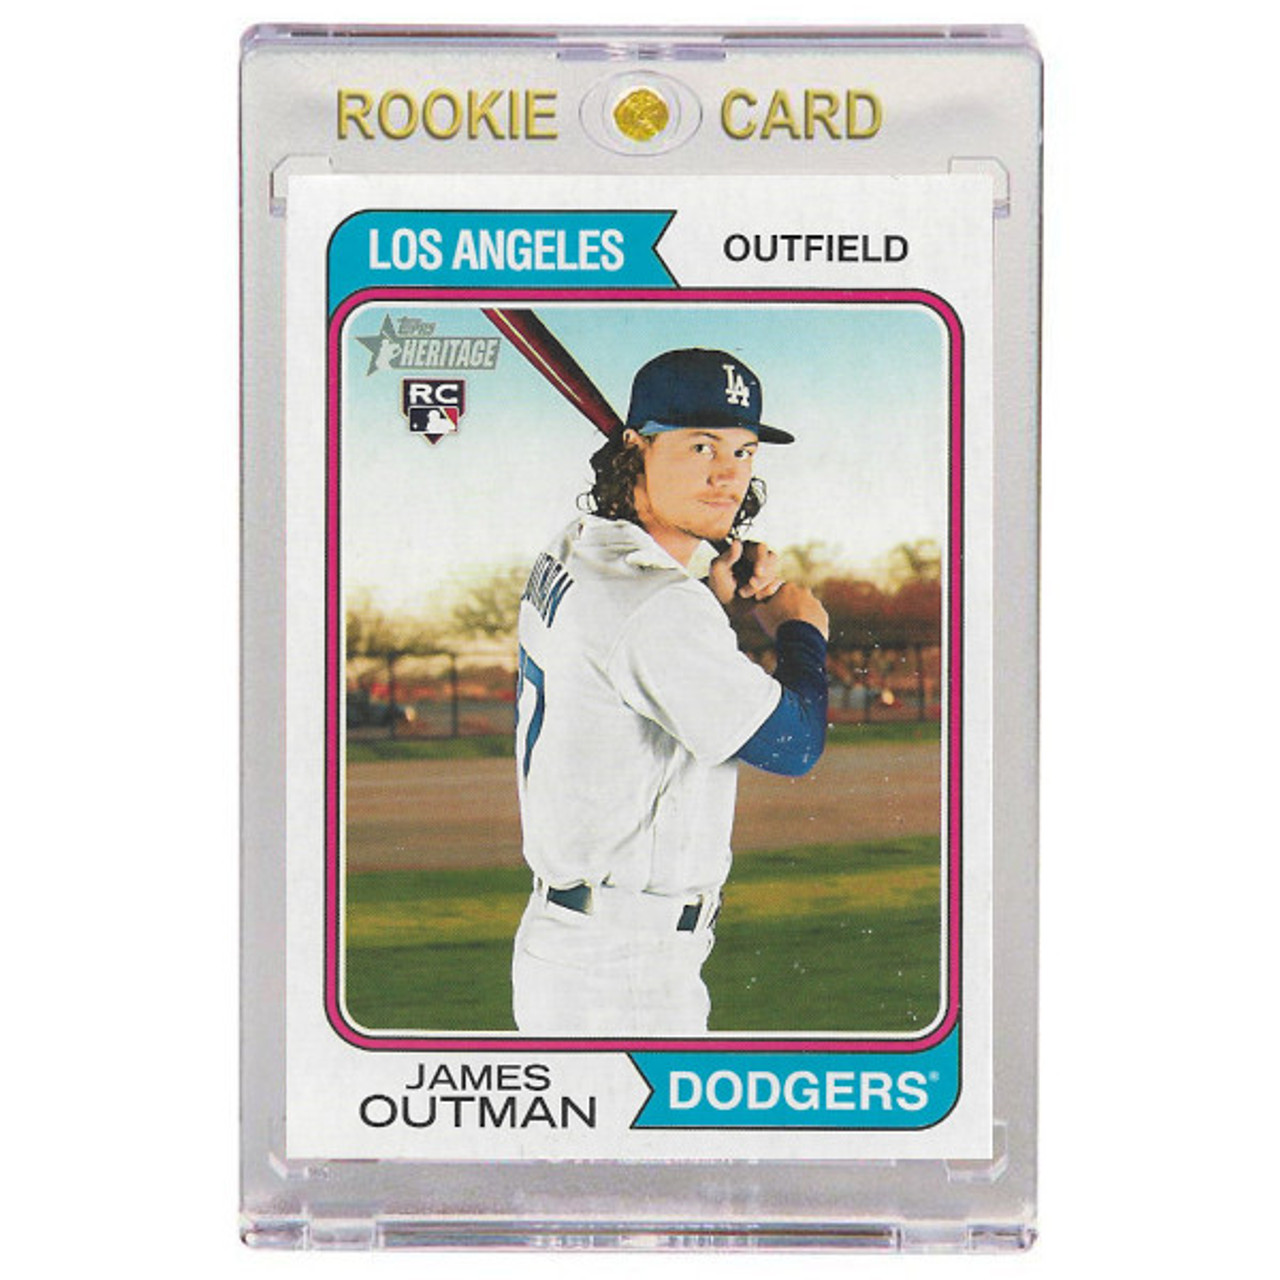 James Outman player card : r/Dodgers